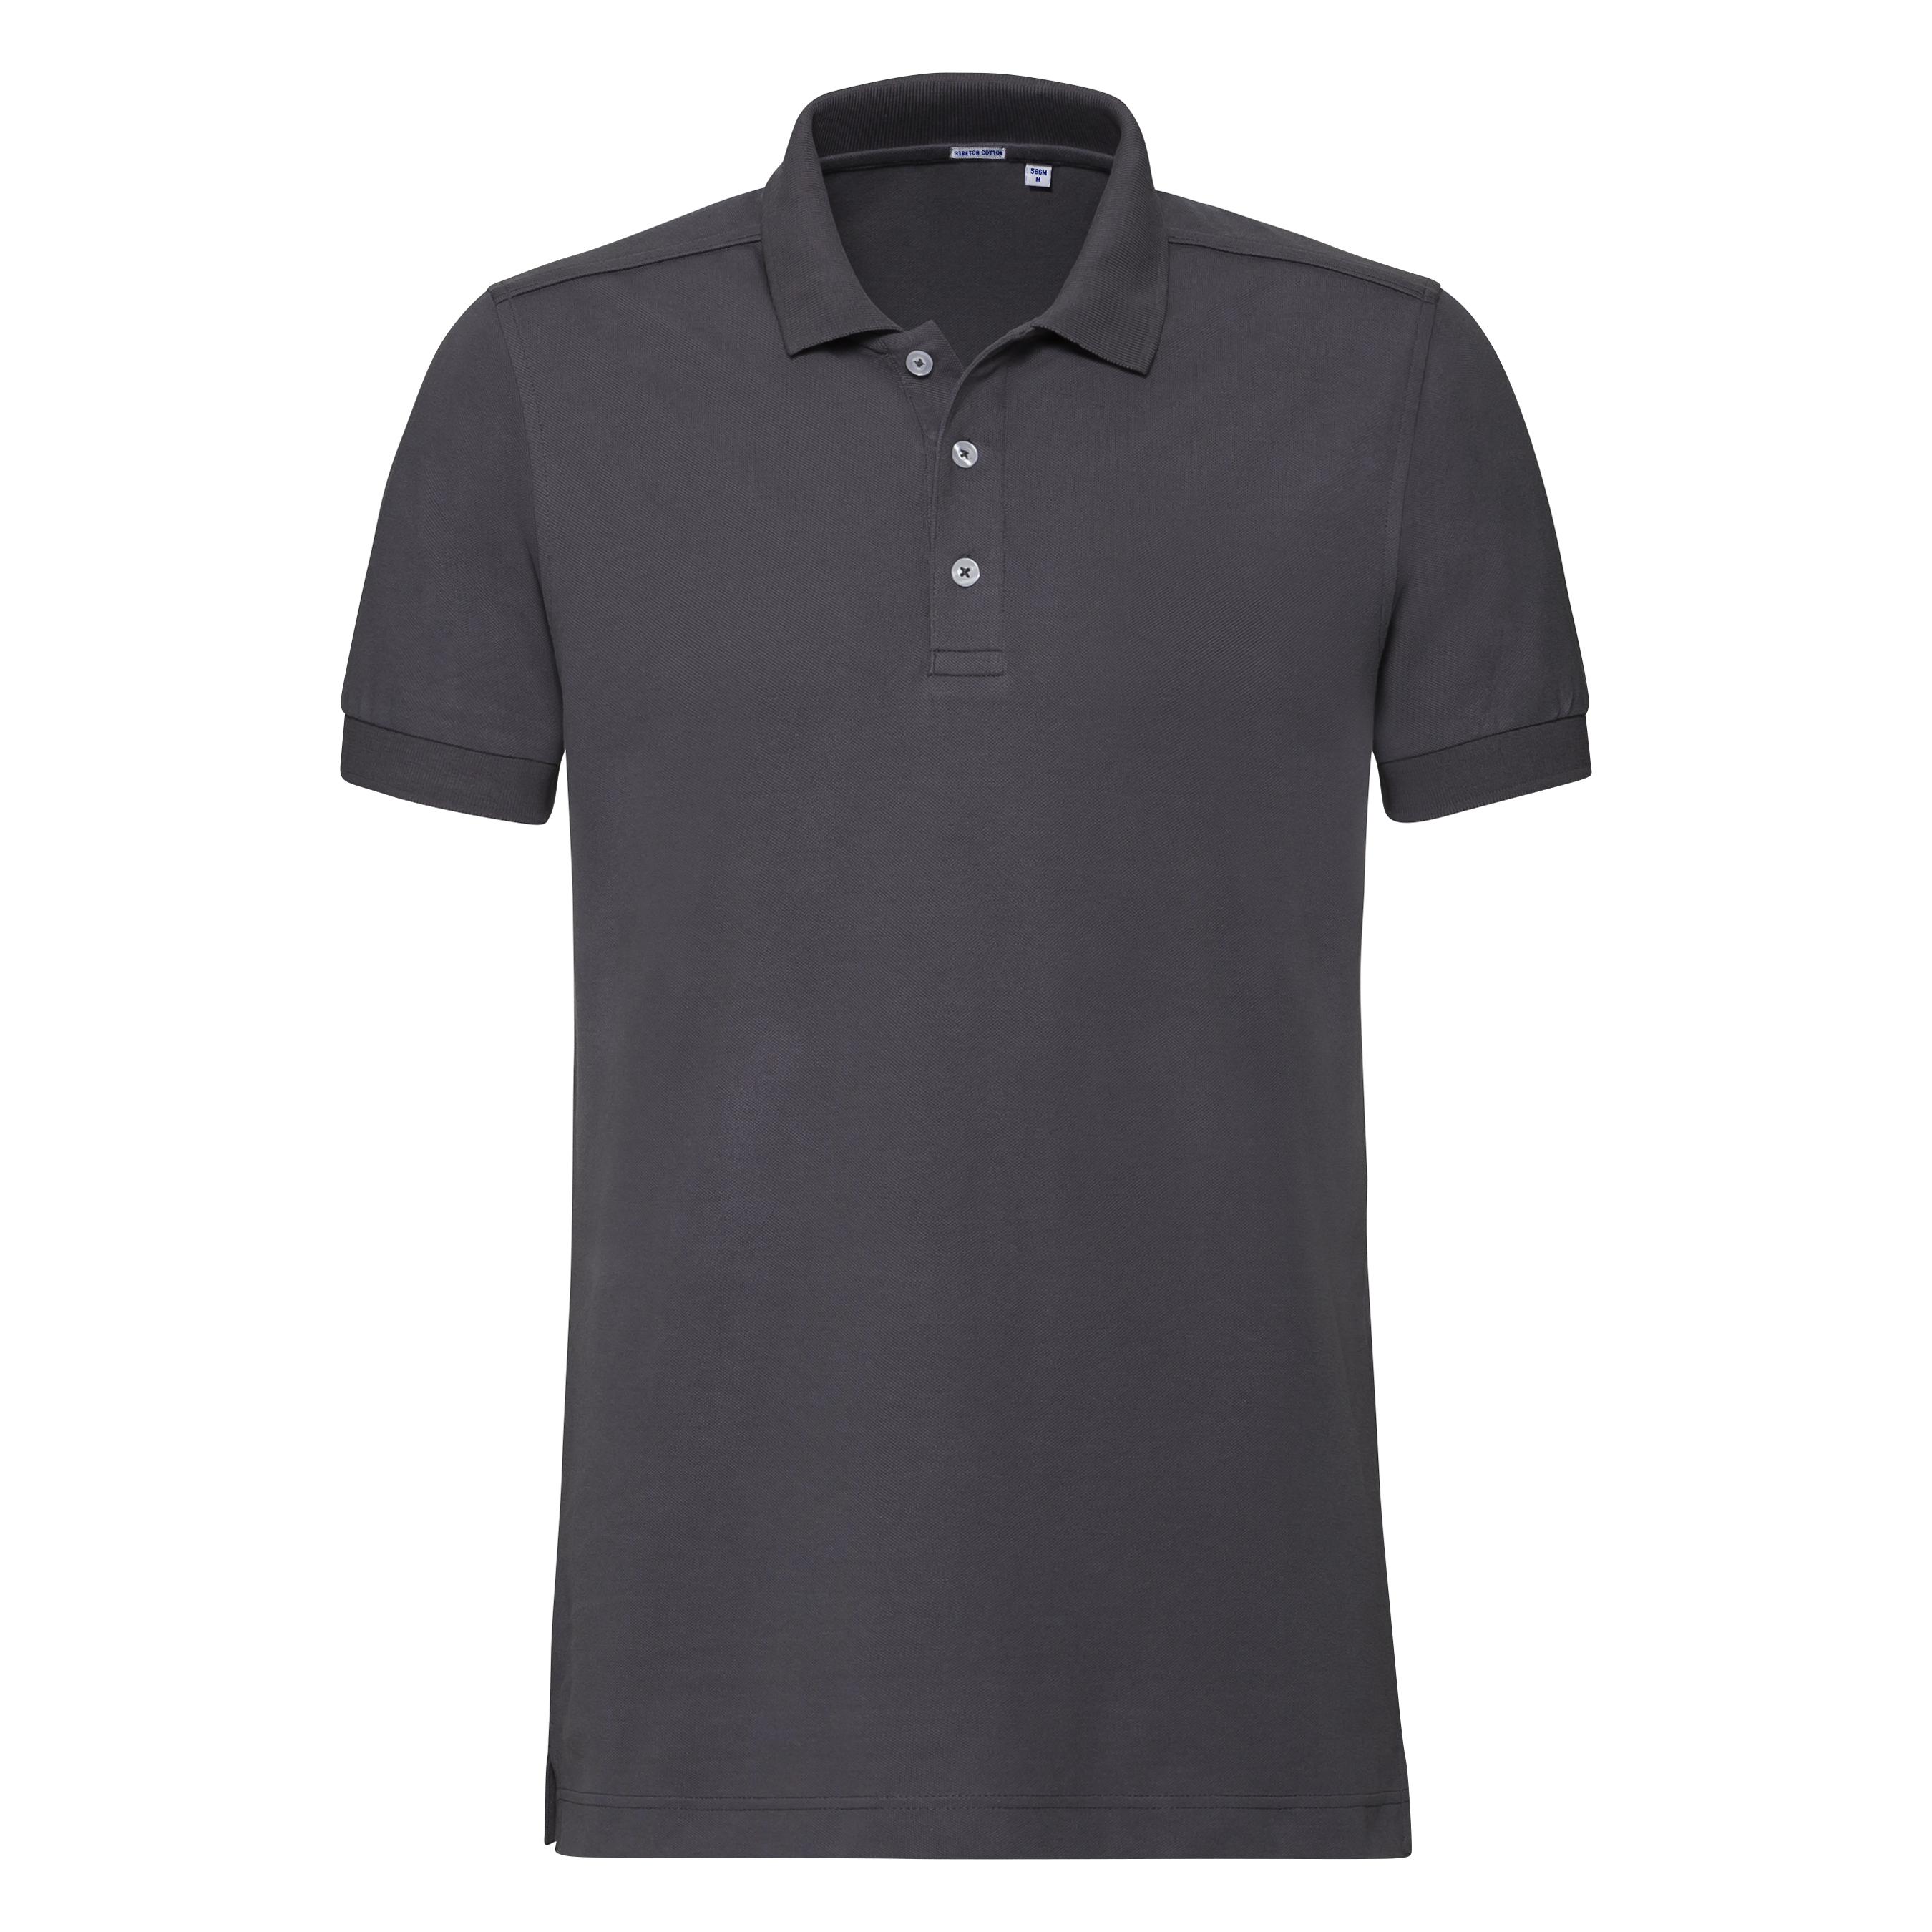 ax-httpswebsystems.s3.amazonaws.comtmp_for_downloadrussell-stretch-polo-convoy-grey.jpg